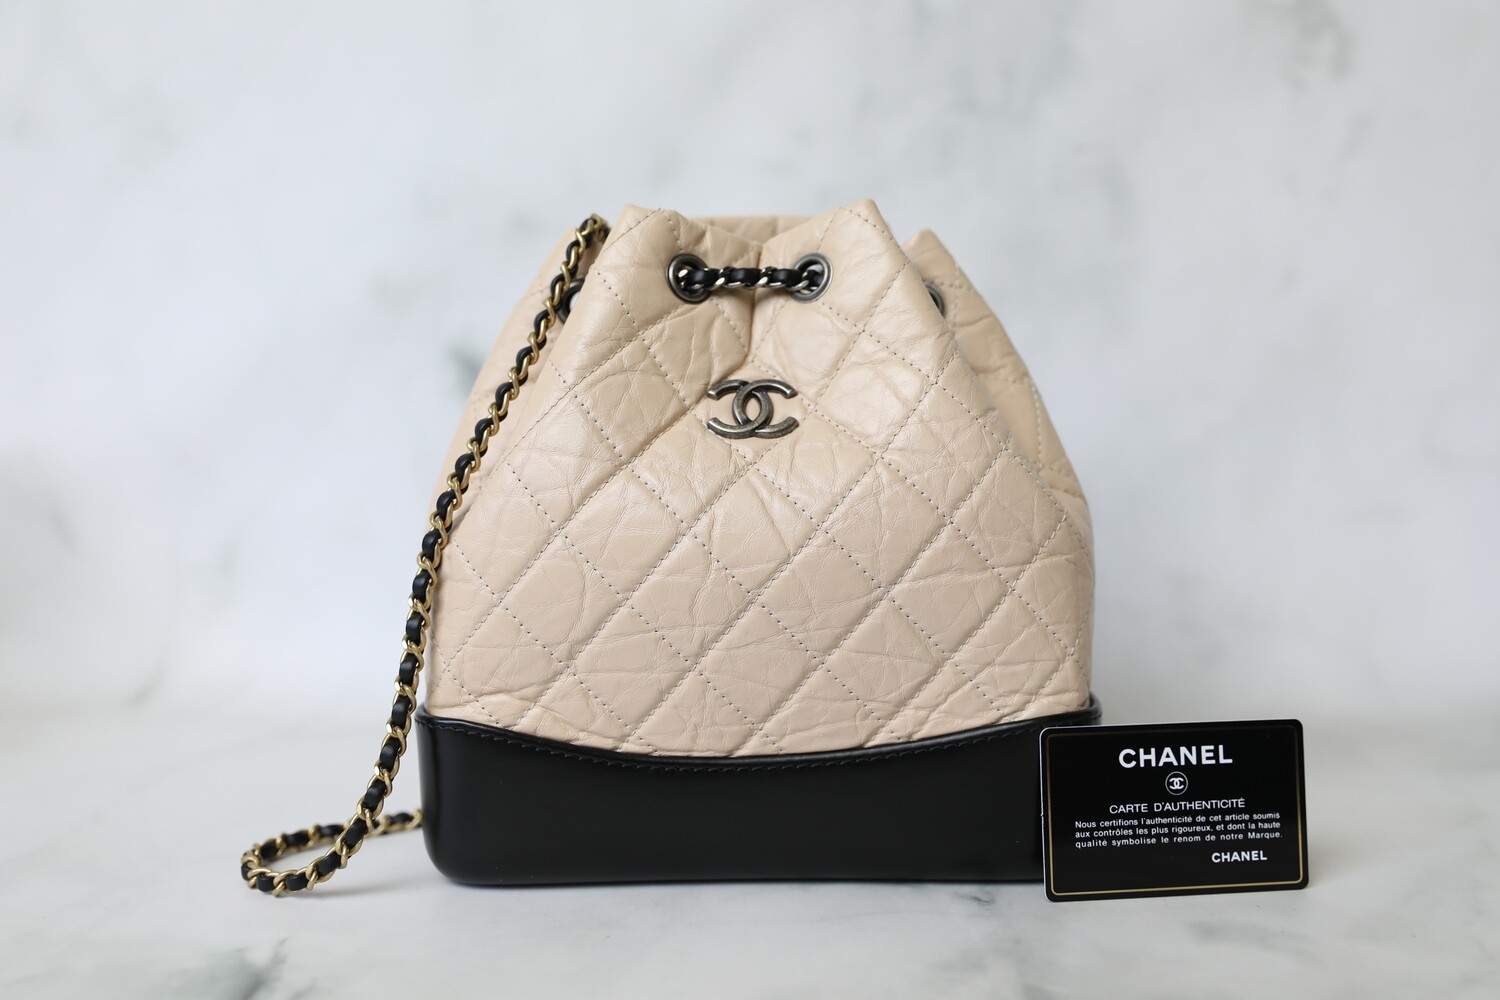 Chanel Gabrielle Backpack Small, Beige and Black, Preowned in Box WA001 -  Julia Rose Boston